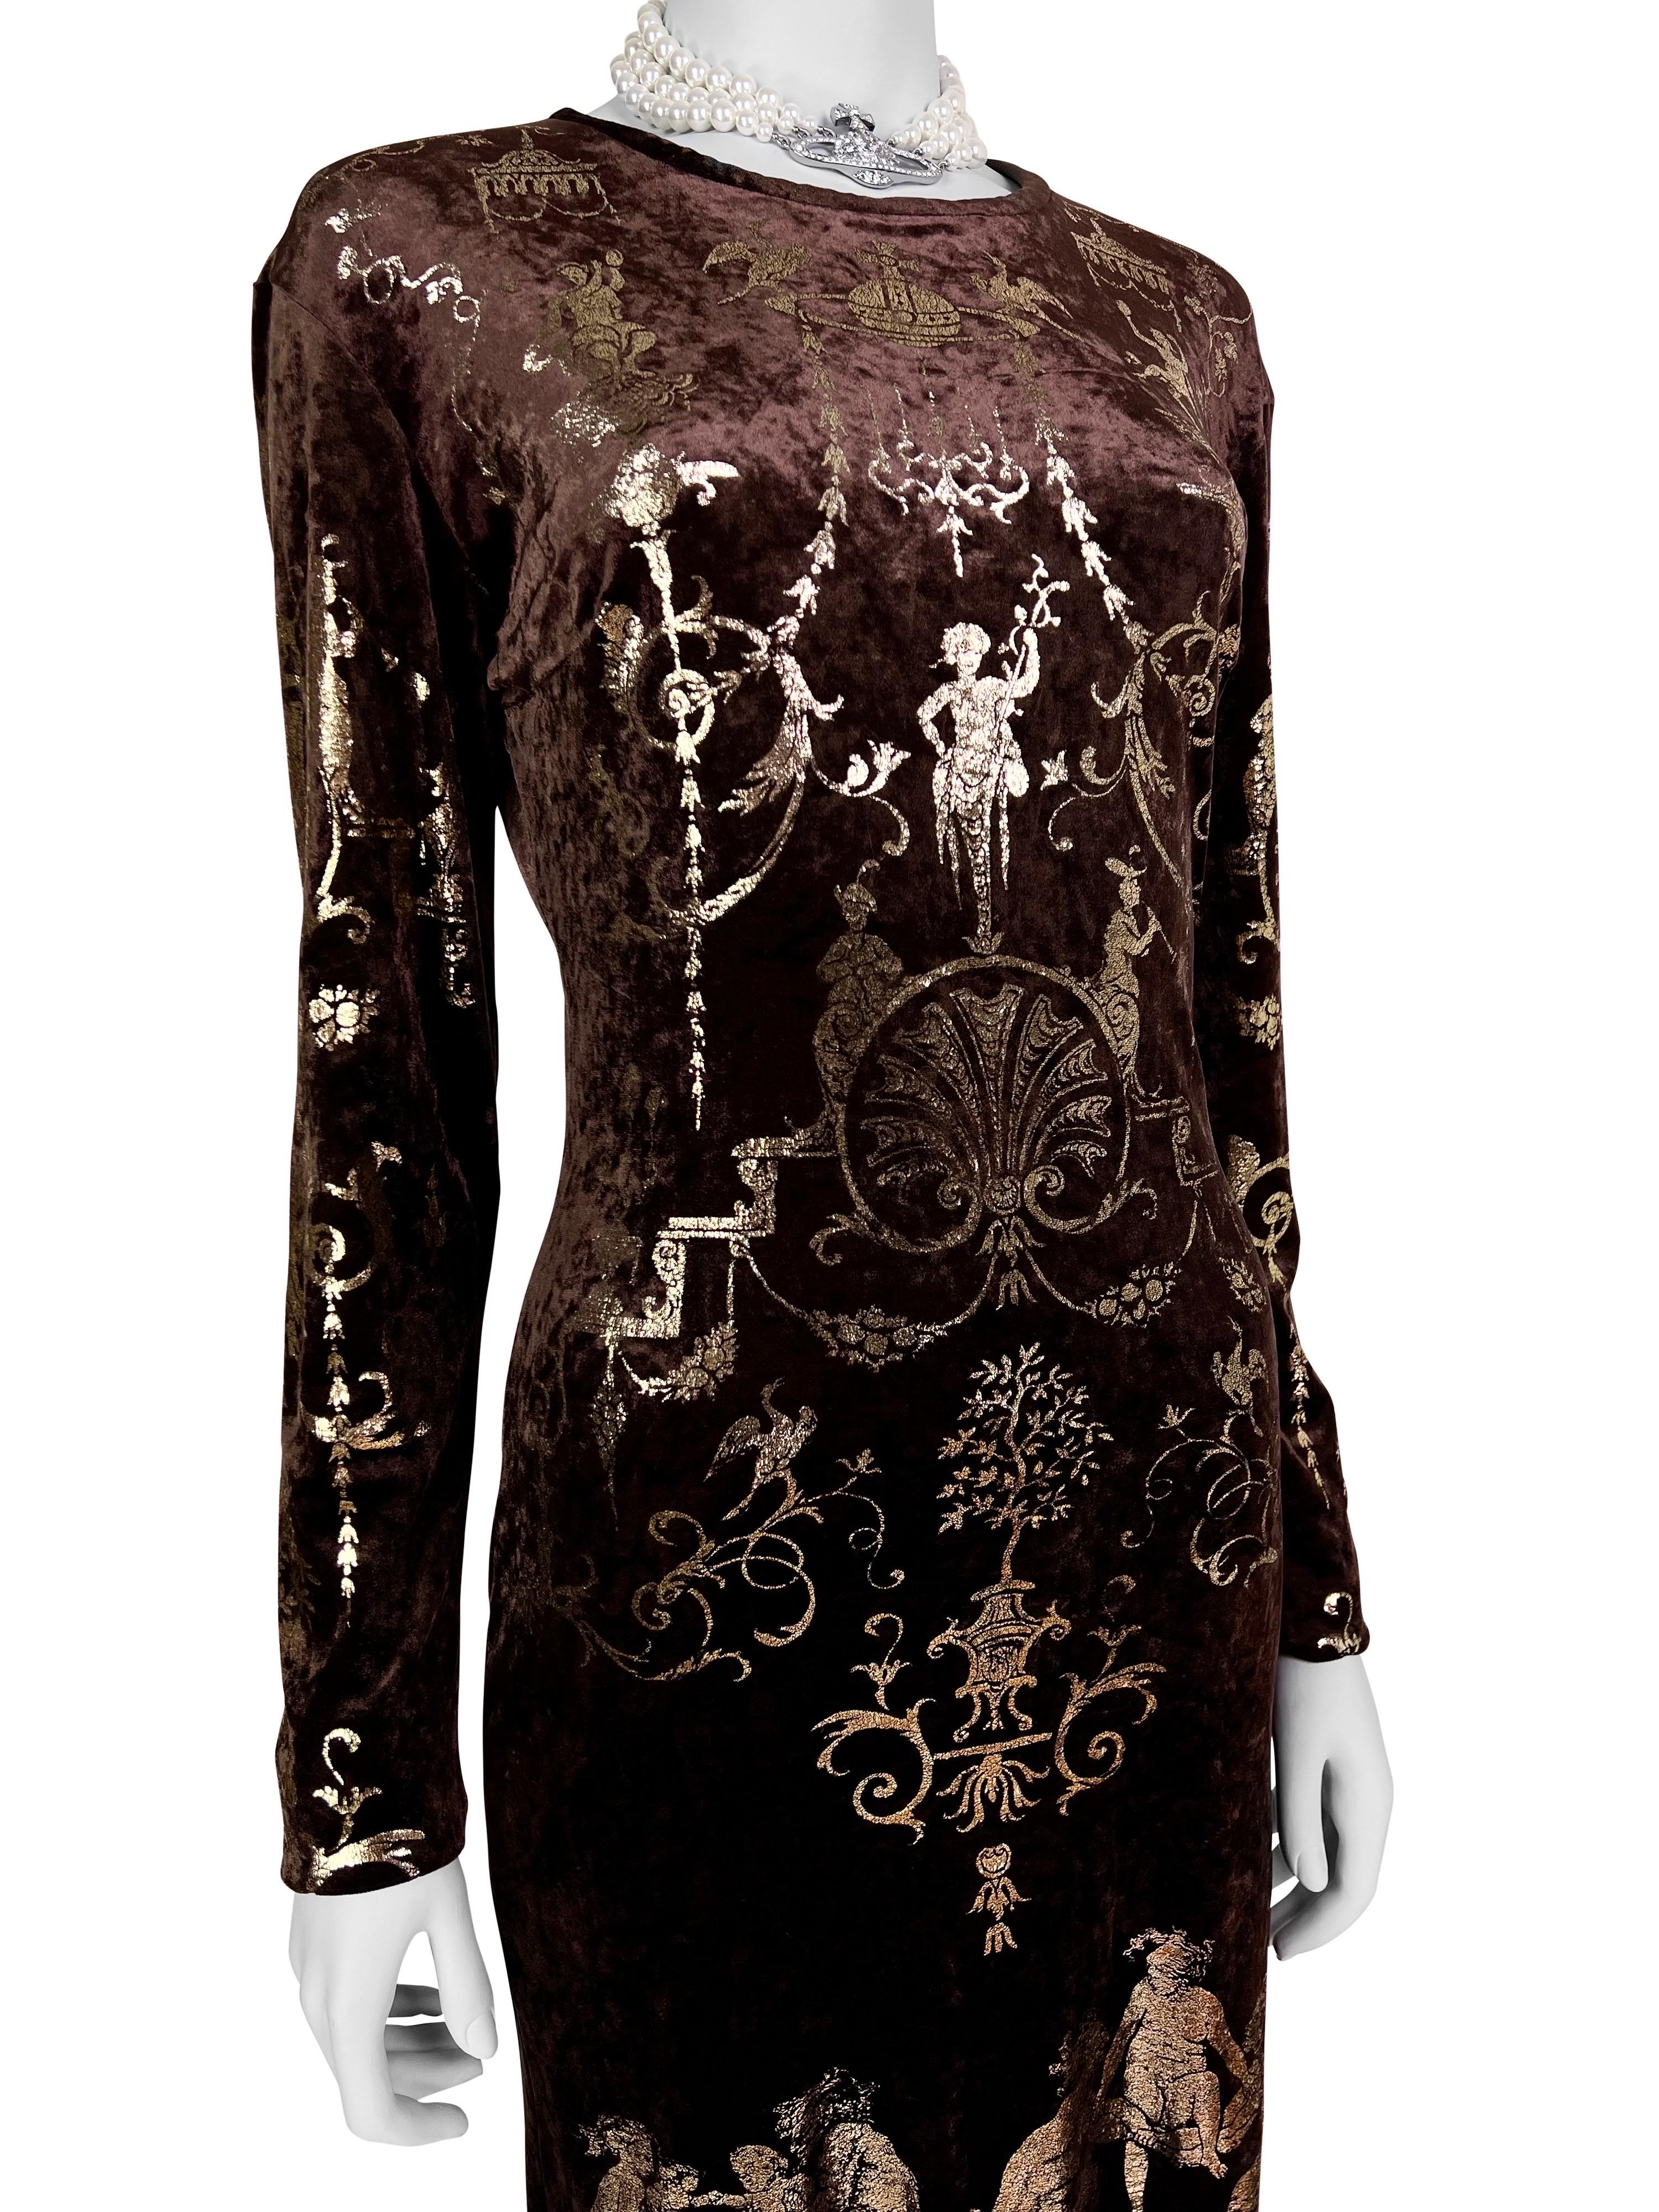 Vivienne Westwood Fall 1990 “Portrait Collection” Foiled “Boulle” Printed Velvet For Sale 3